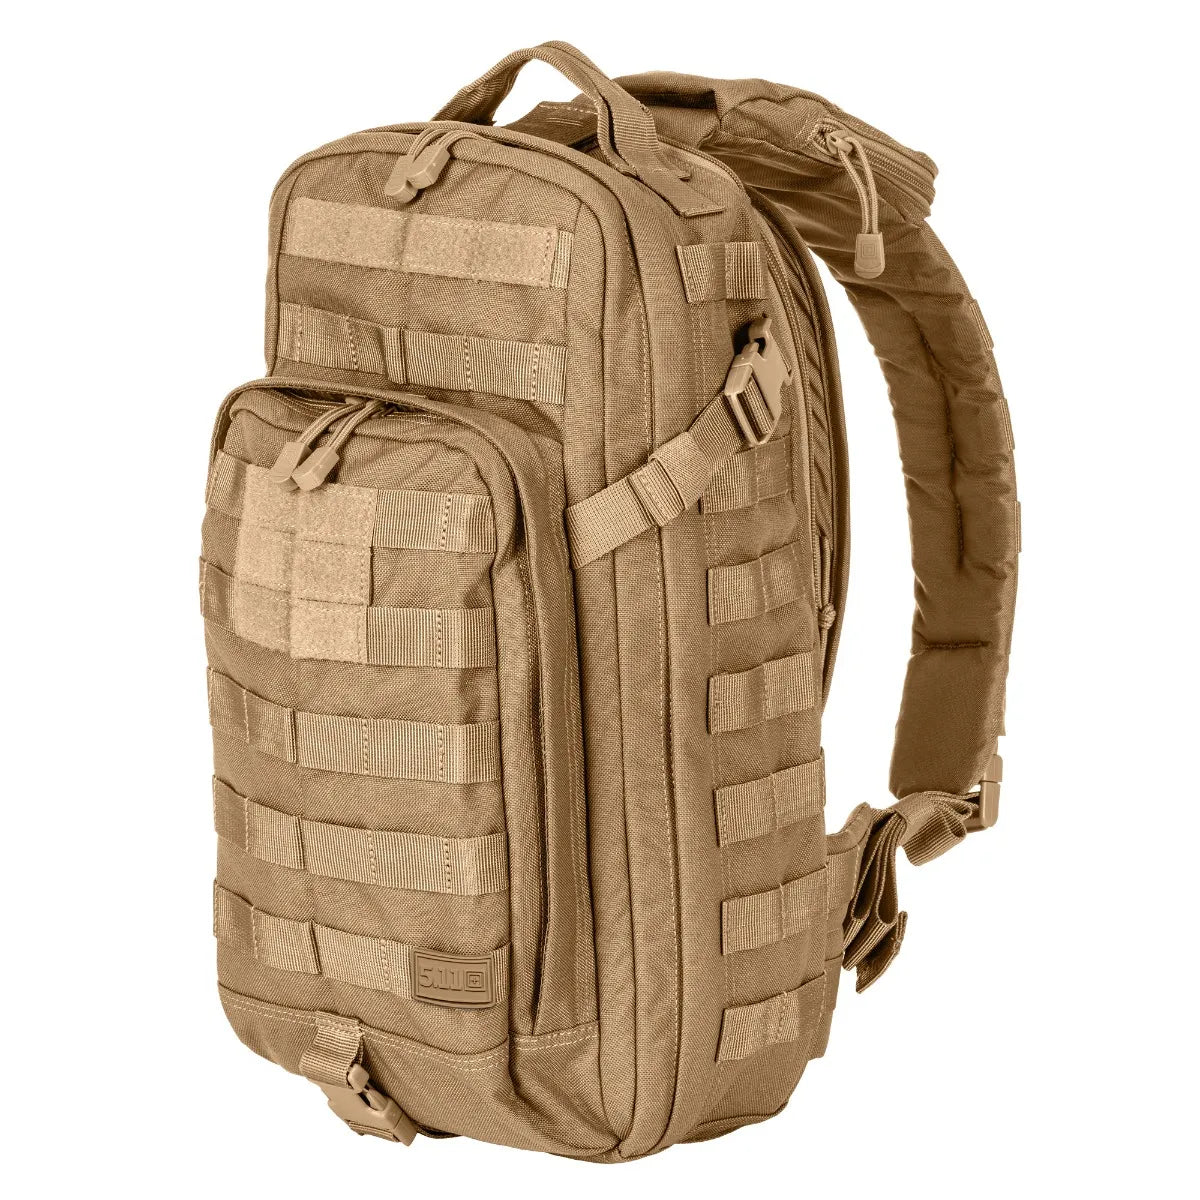 a large backpack with multiple compartments and straps